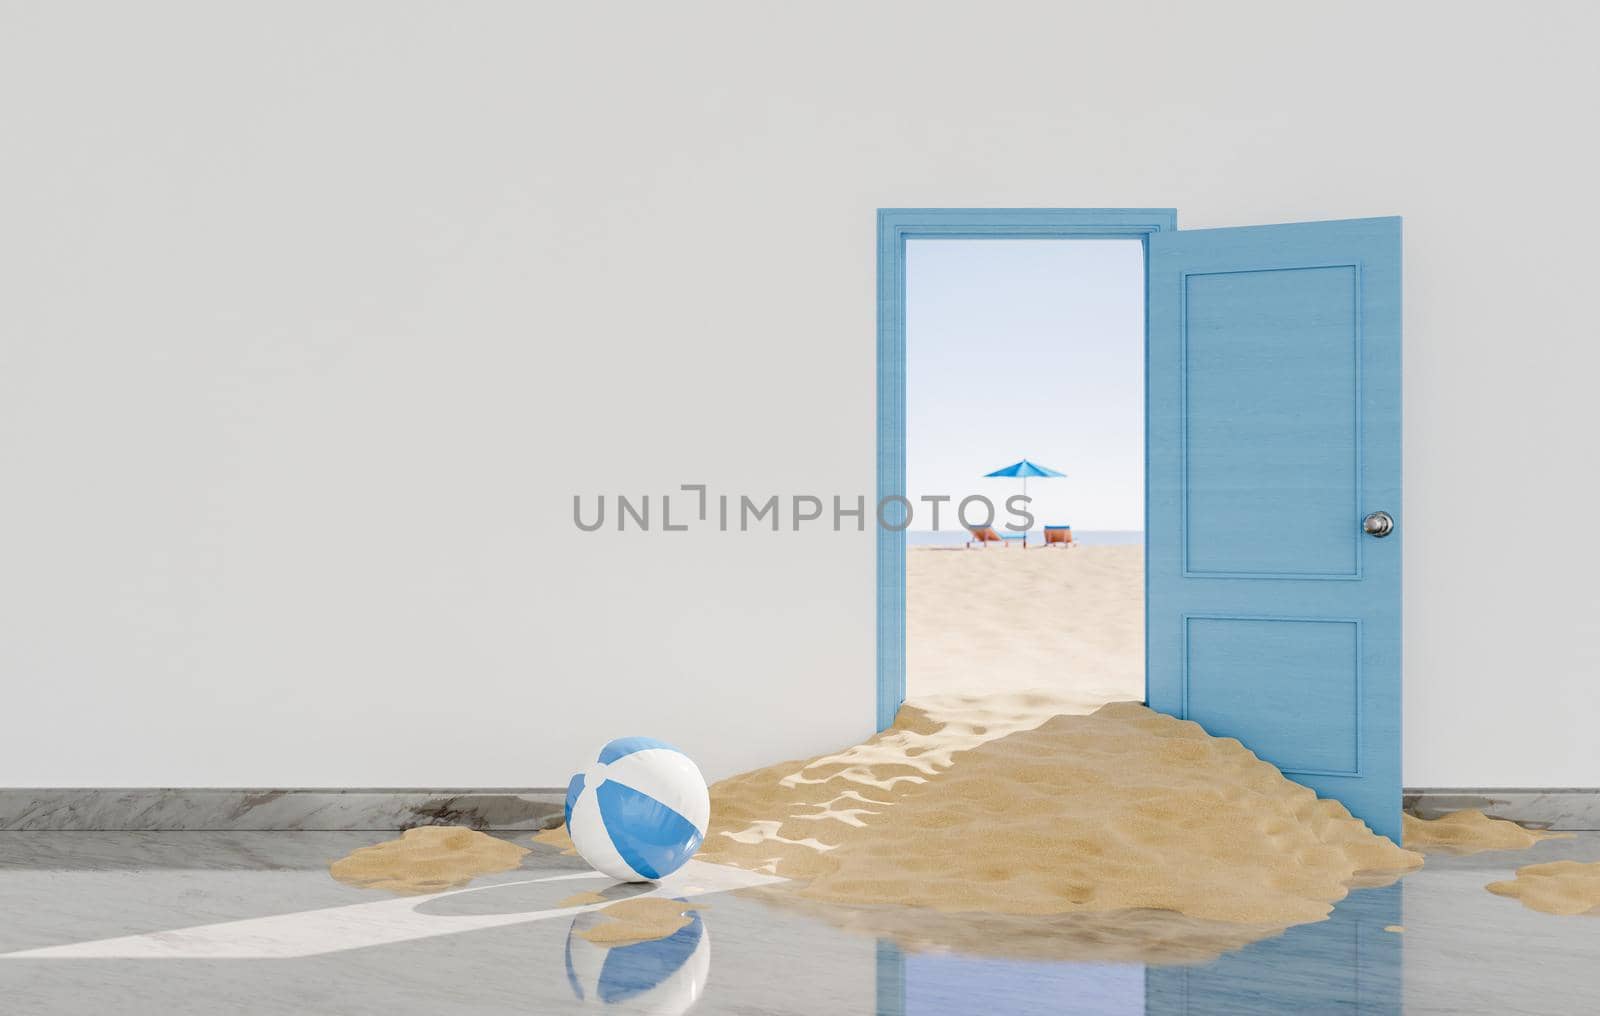 3D illustration of ball and sand spreading through opened blue door from beach located behind gray wall during summer vacation